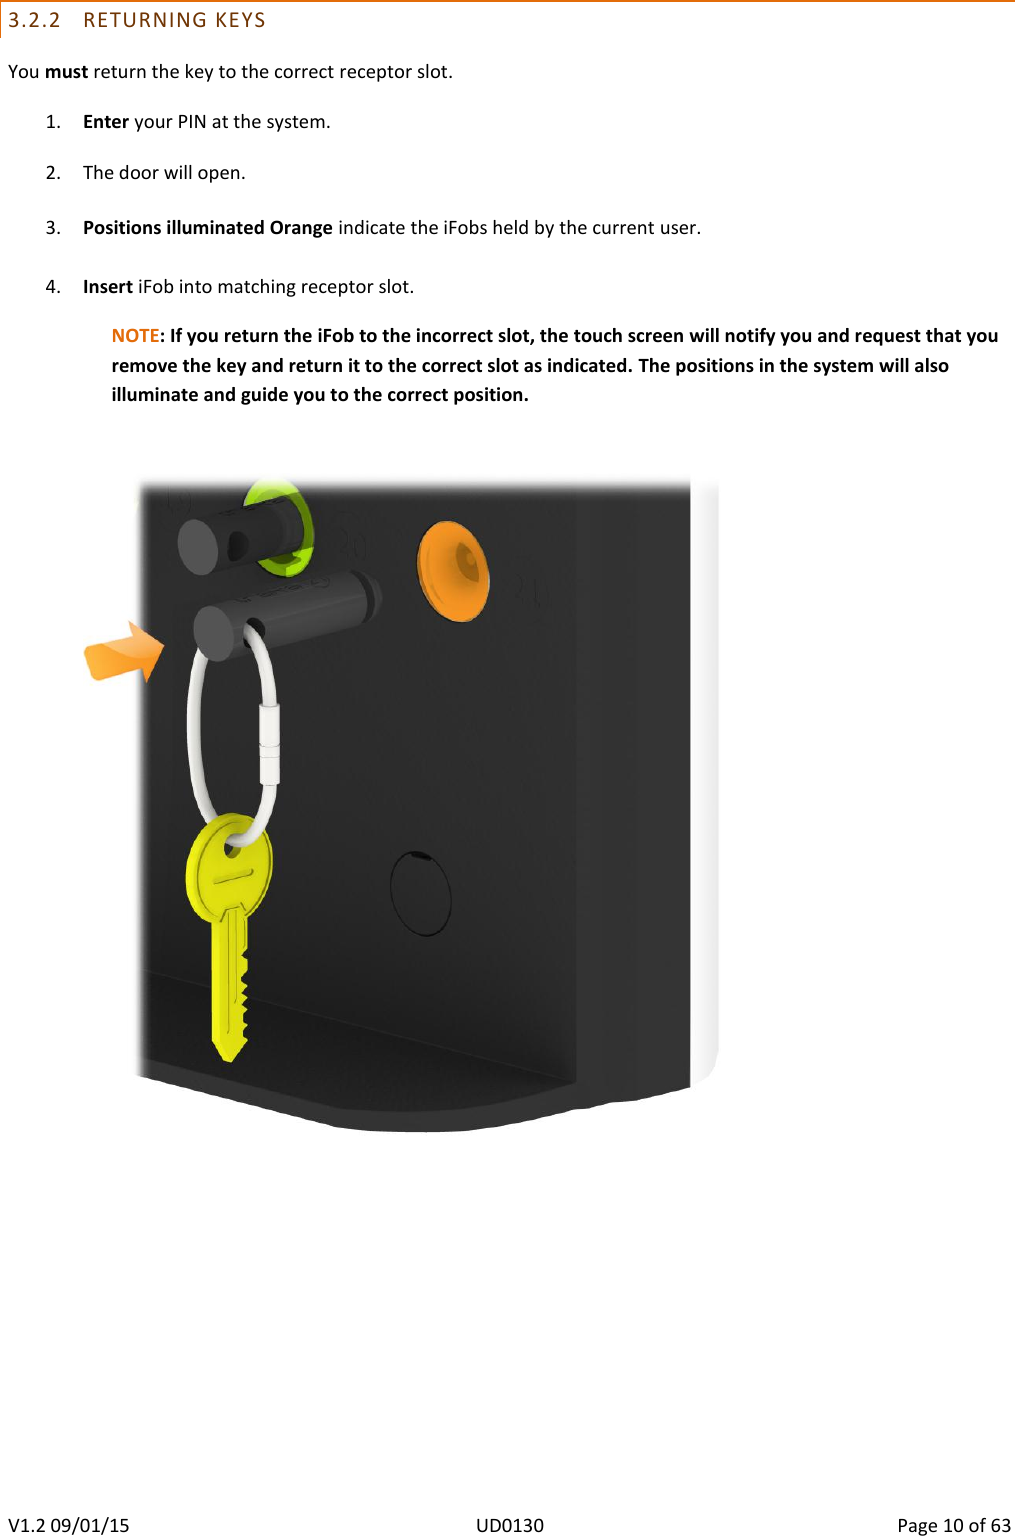   V1.2 09/01/15  UD0130  Page 10 of 63   3.2.2 RETURNING KEYS You must return the key to the correct receptor slot. 1. Enter your PIN at the system.  2. The door will open.  3. Positions illuminated Orange indicate the iFobs held by the current user.  4. Insert iFob into matching receptor slot. NOTE: If you return the iFob to the incorrect slot, the touch screen will notify you and request that you remove the key and return it to the correct slot as indicated. The positions in the system will also illuminate and guide you to the correct position.      